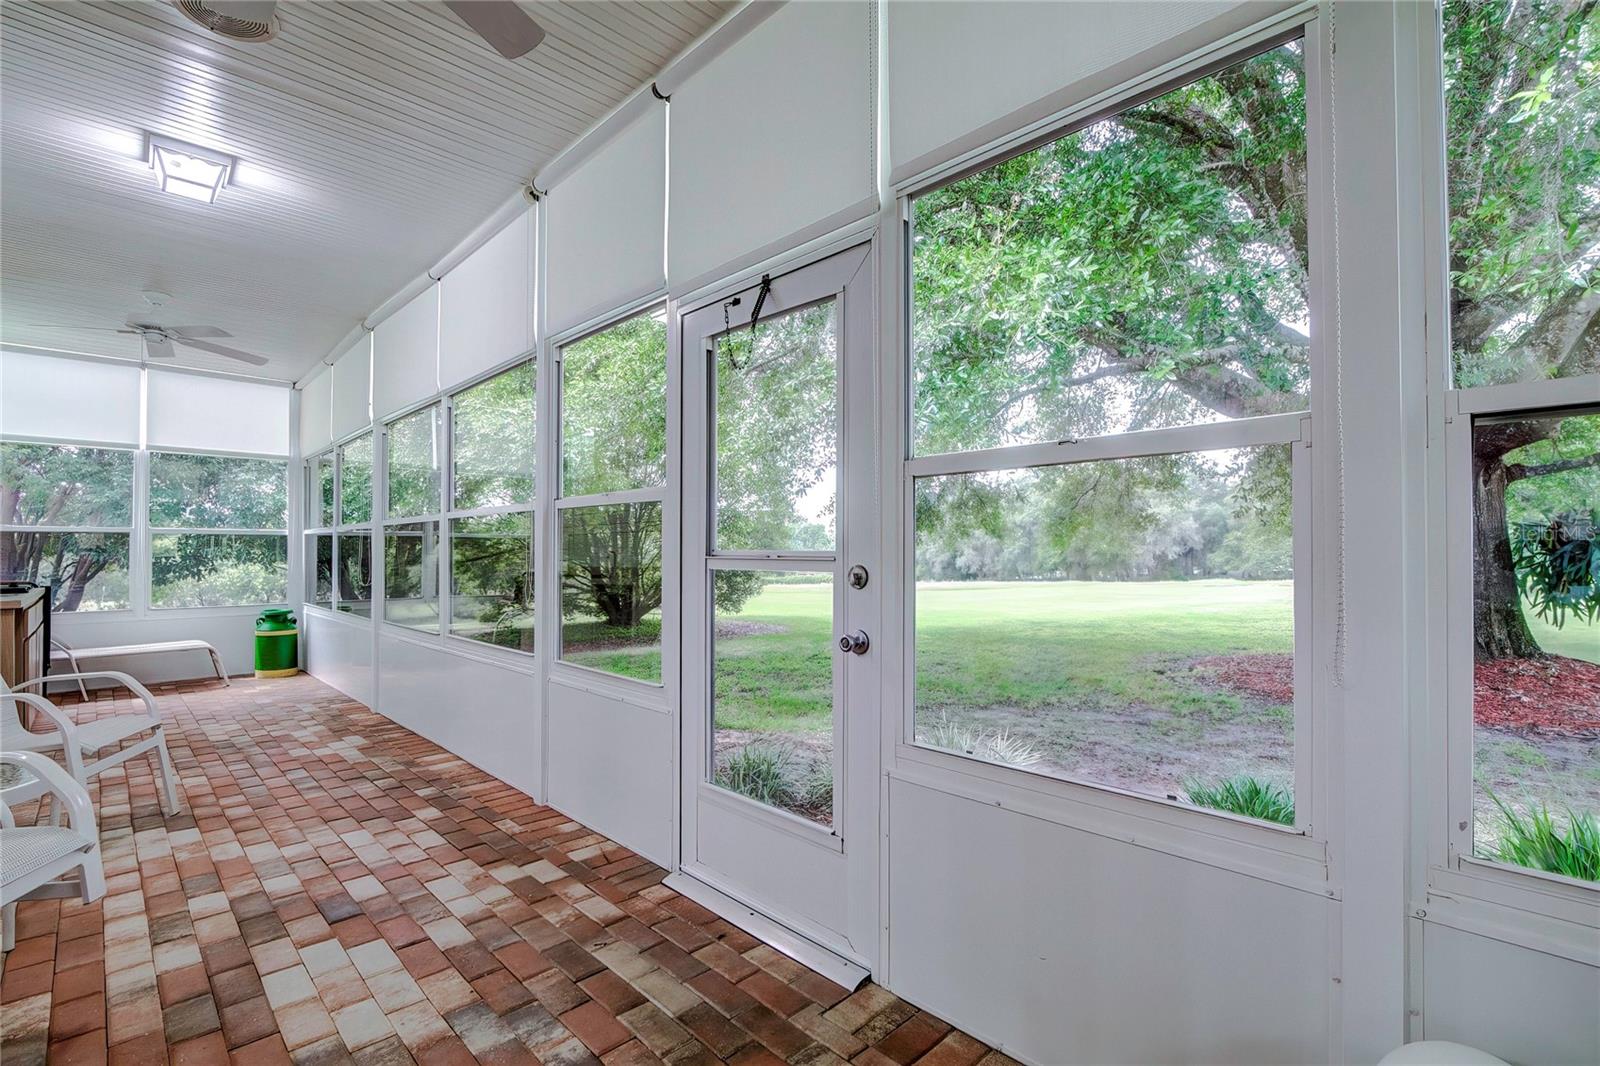 Enclosed Porch Adorned with Brick Pavers